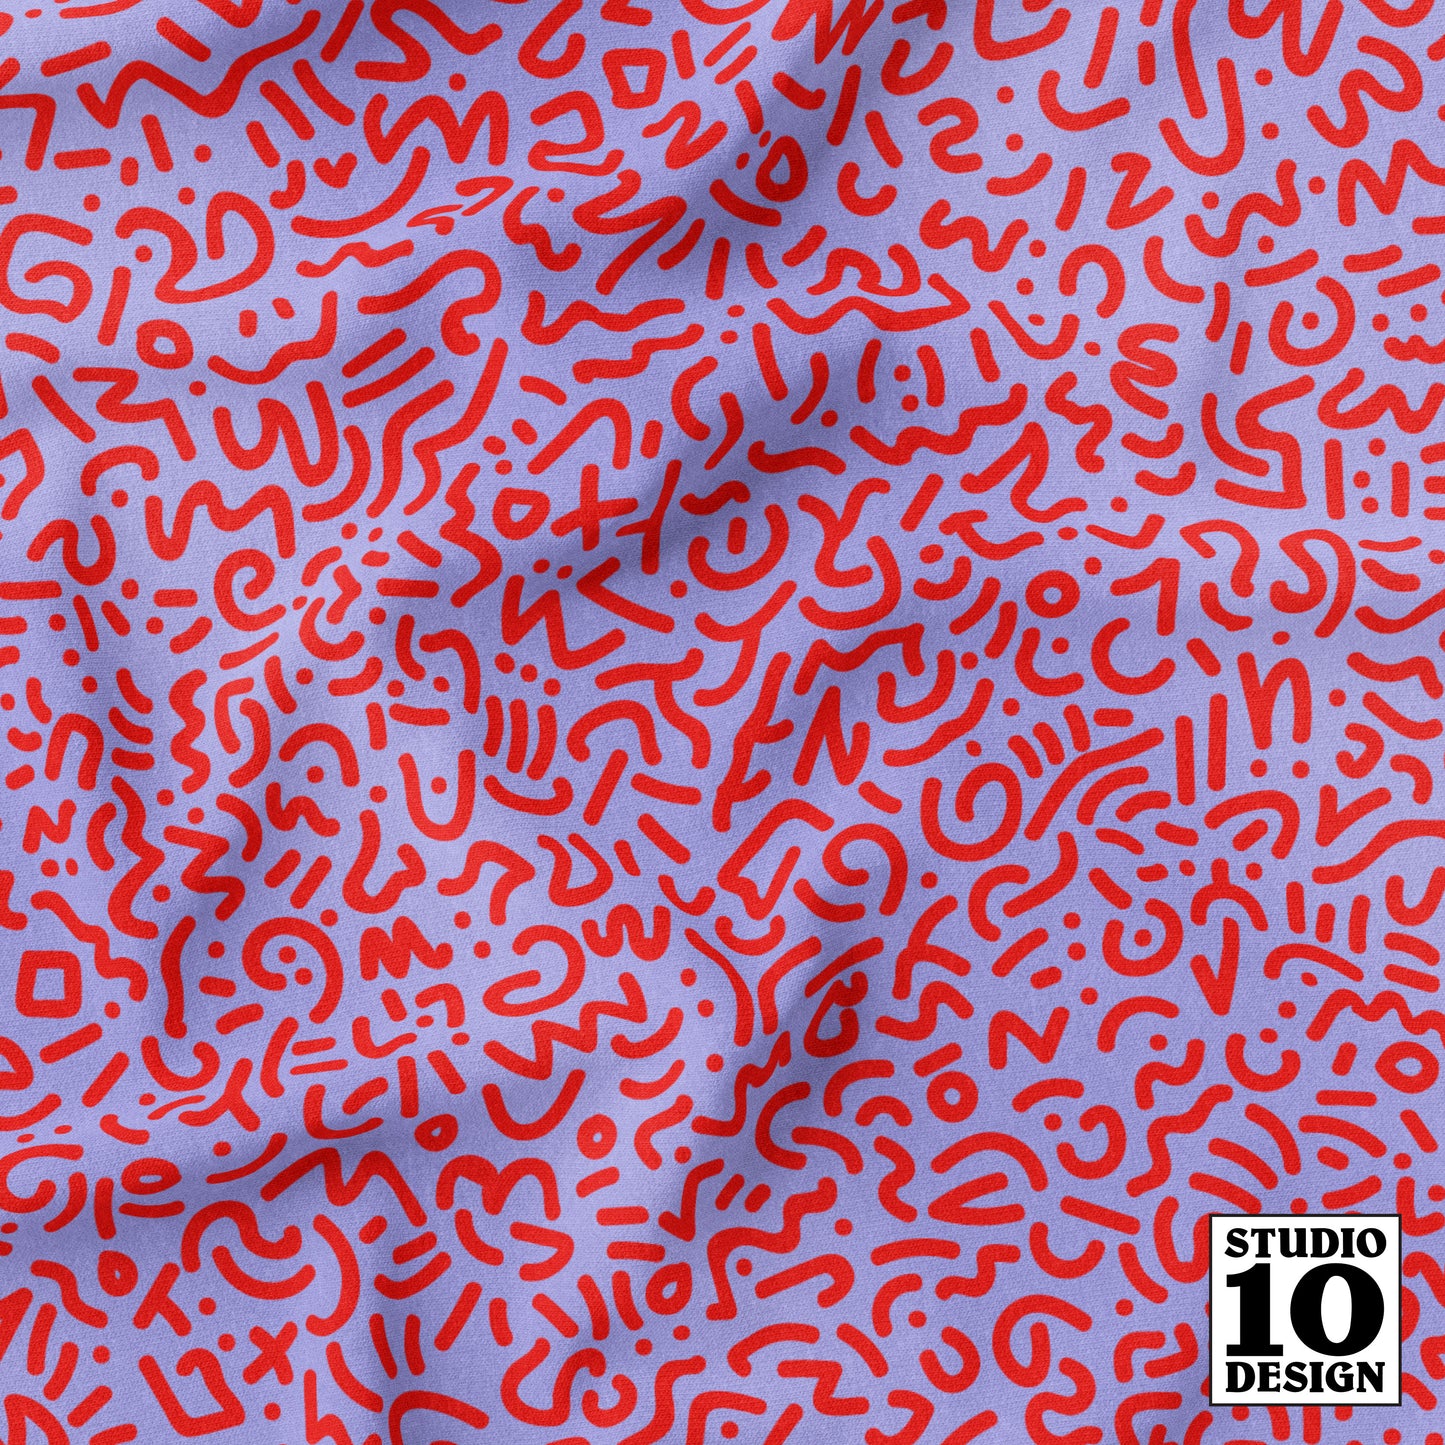 Doodle Red+Lilac Printed Fabric by Studio Ten Design